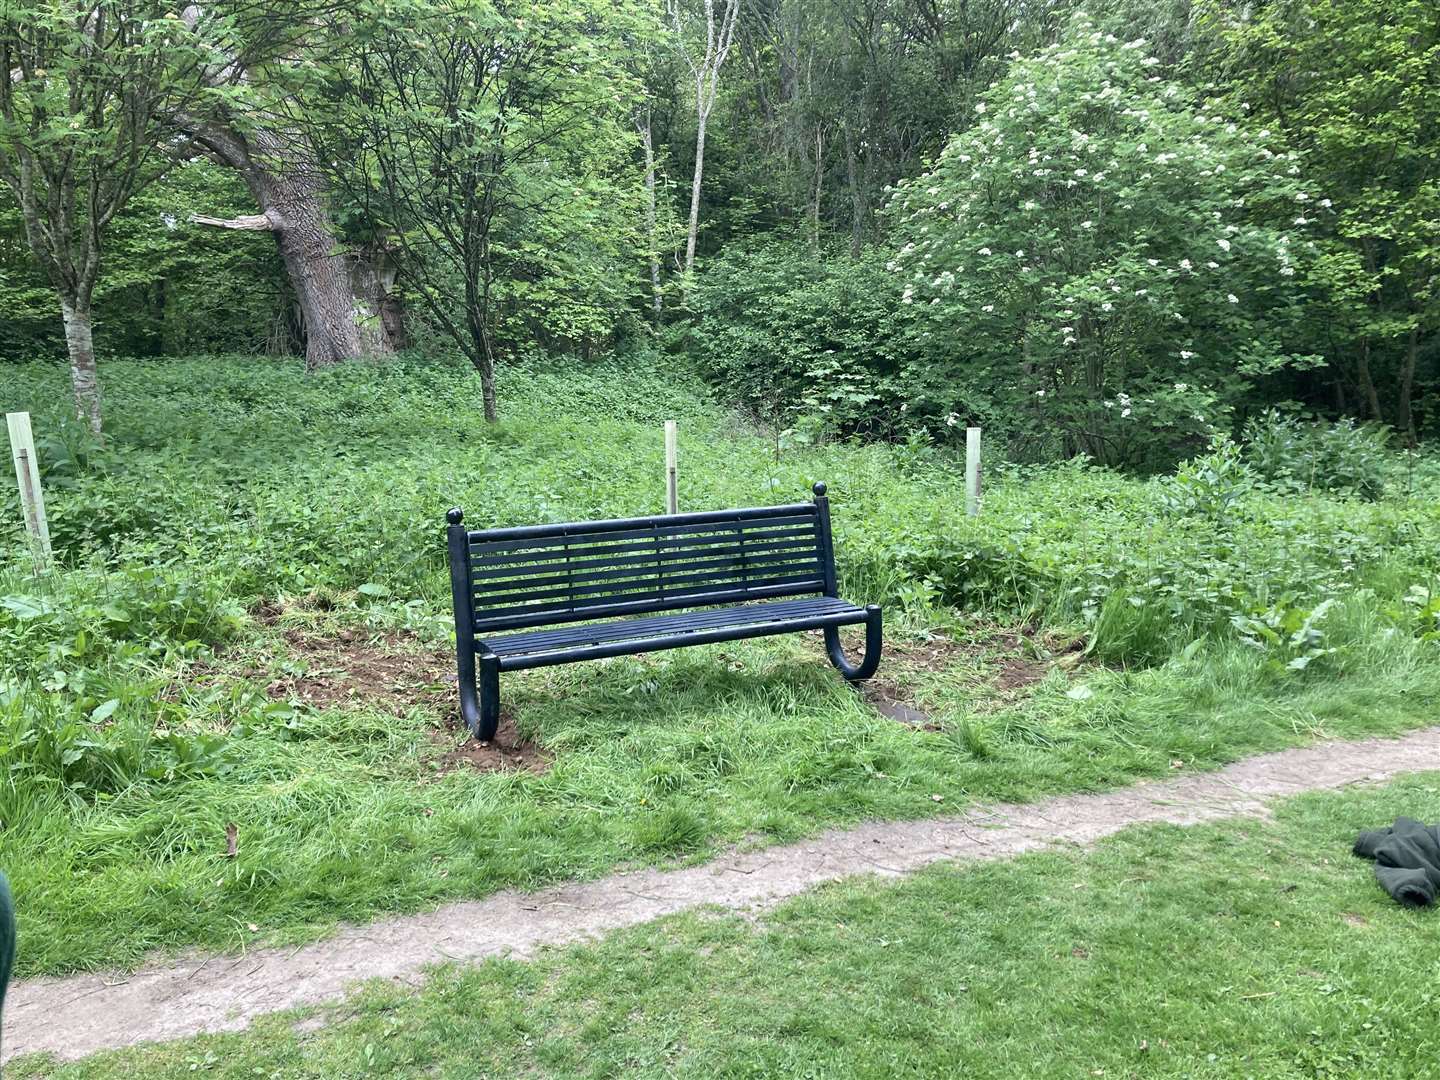 A bench off the path in the woods.